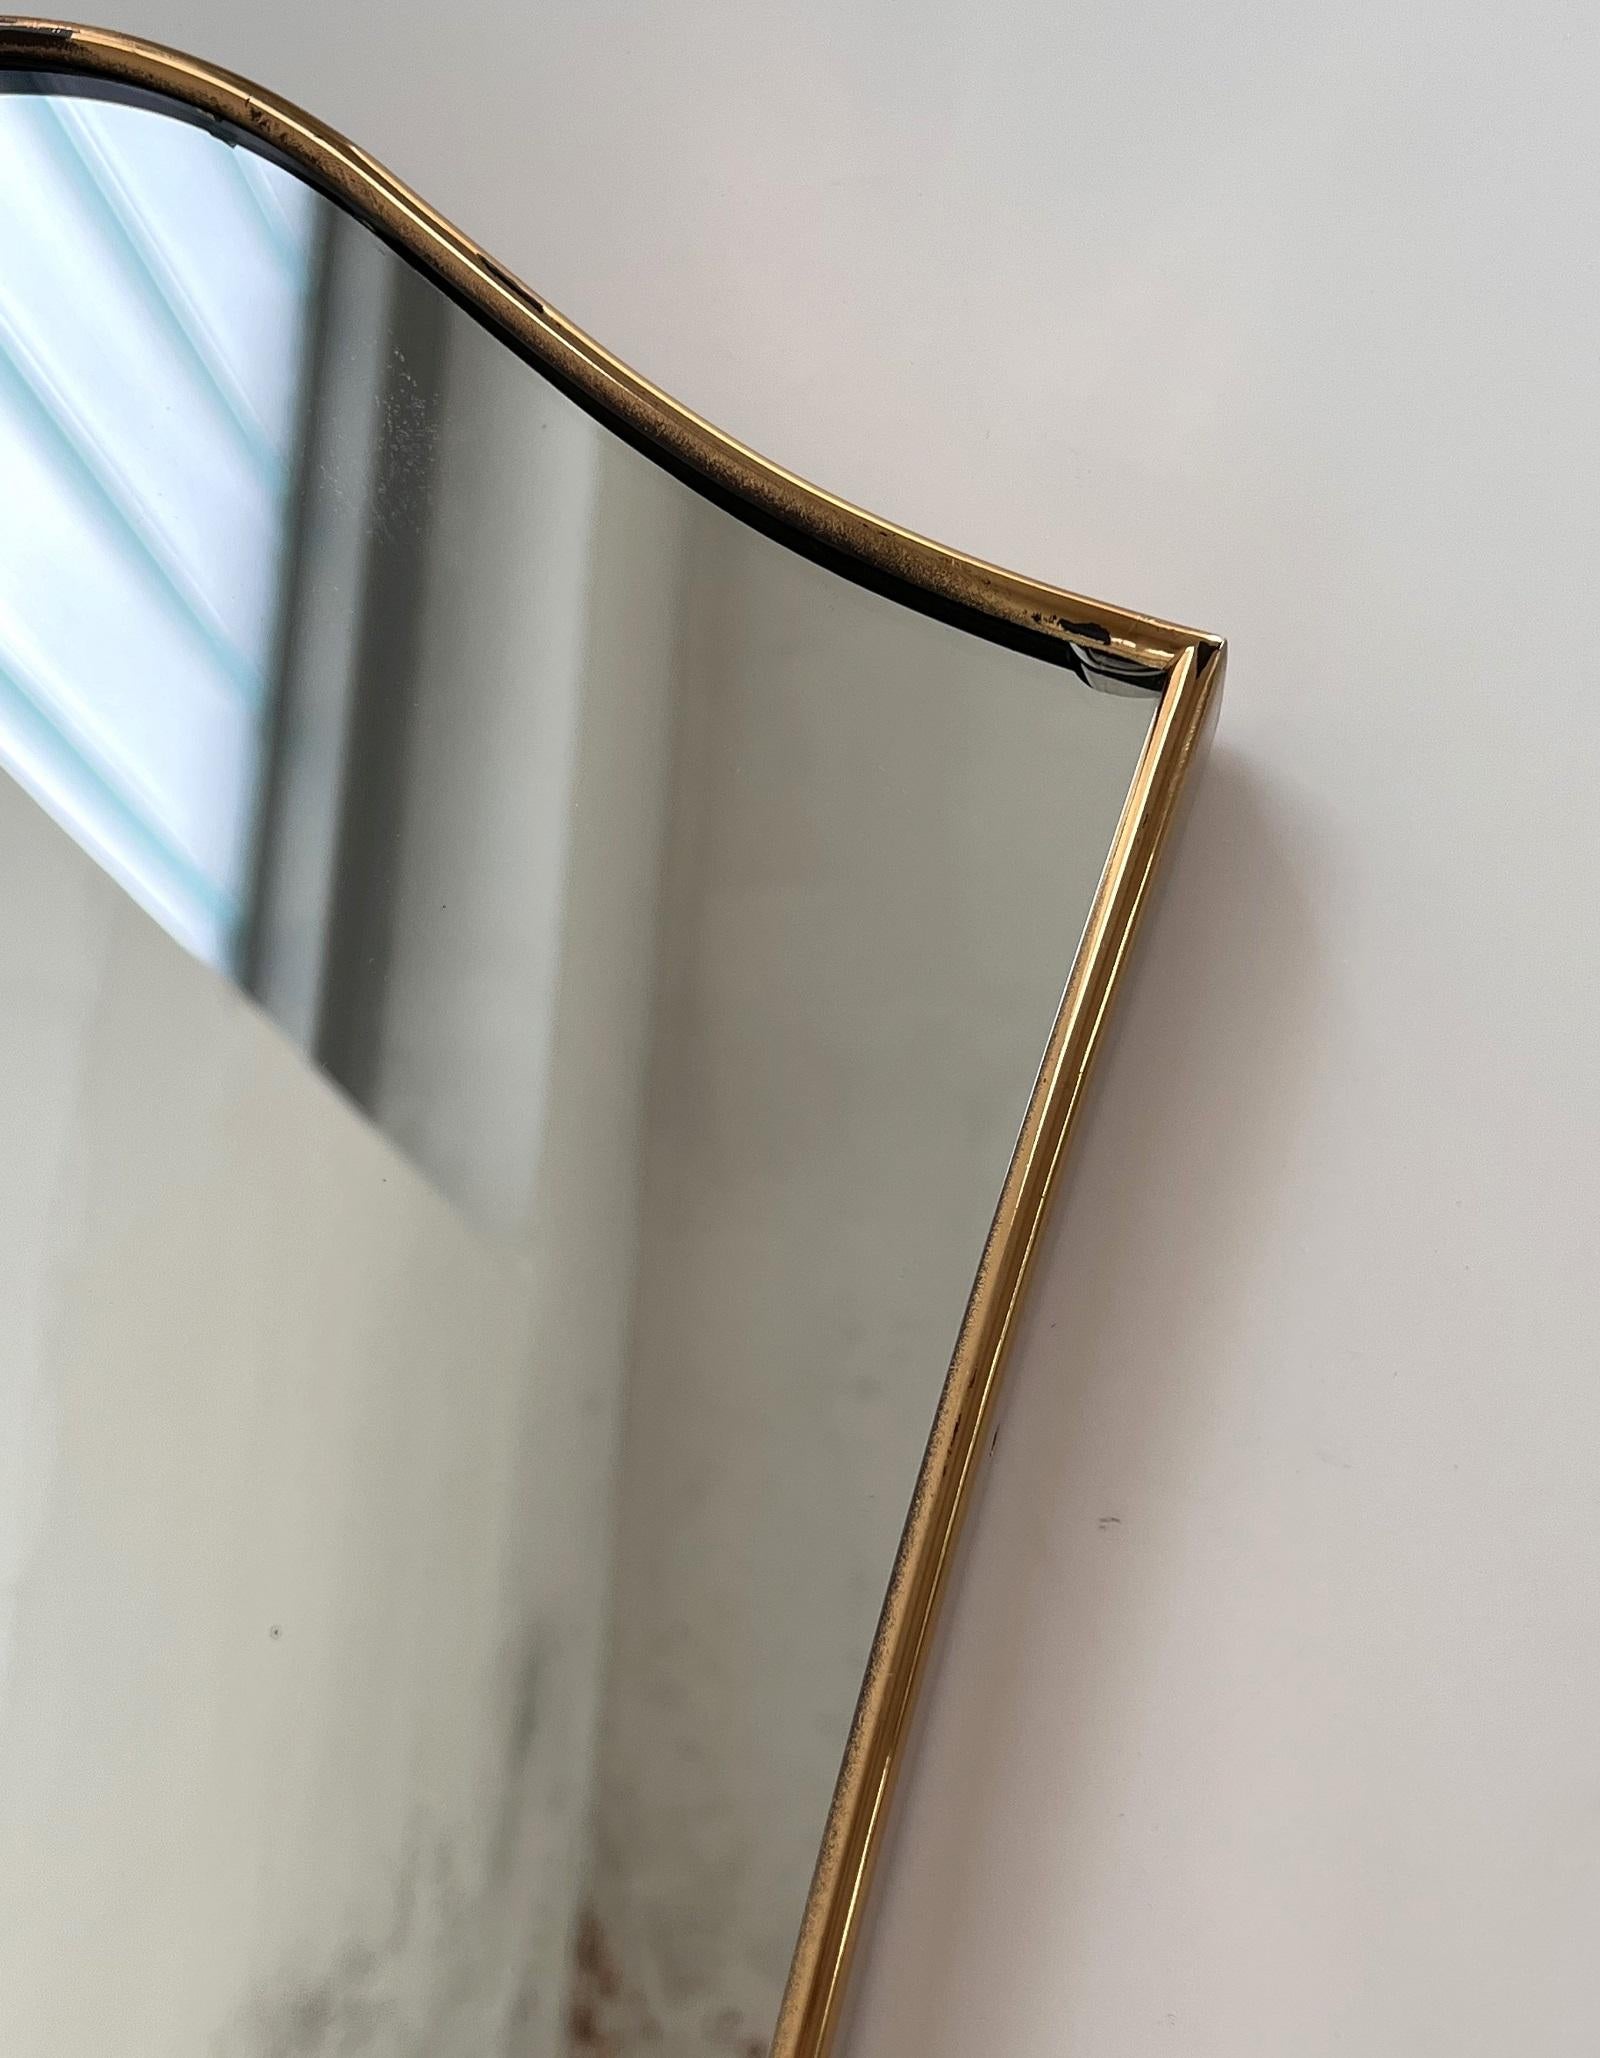 Italian Midcentury Extra Large Vintage Wall Mirror with Brass Frame, 1970s For Sale 8